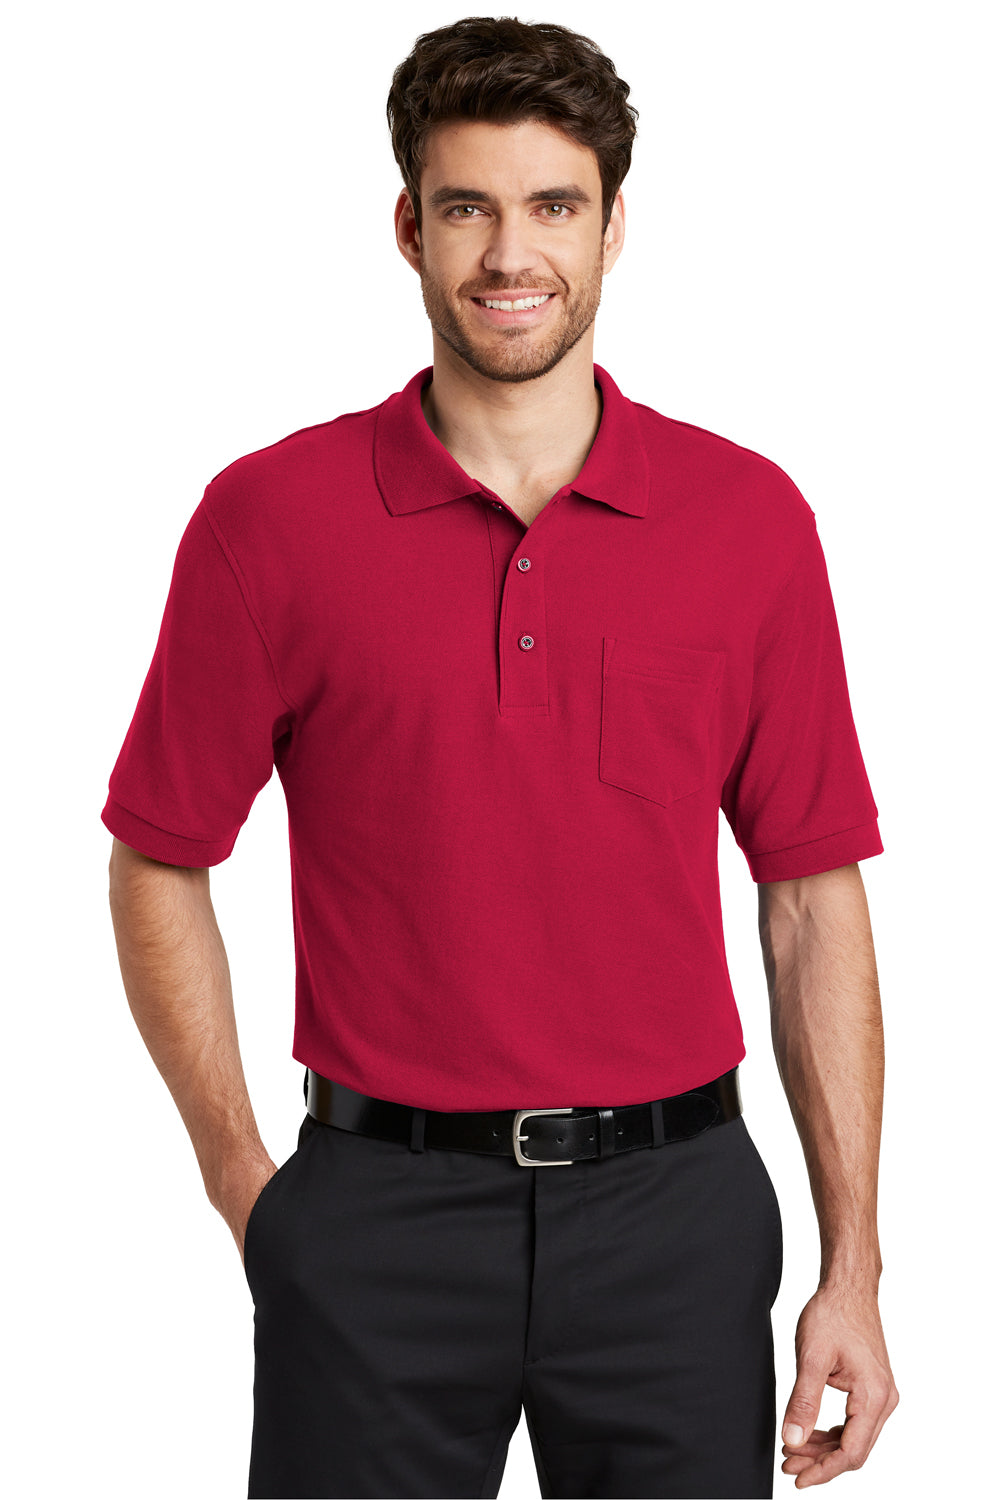 Port Authority K500P Mens Silk Touch Wrinkle Resistant Short Sleeve Polo Shirt w/ Pocket Red Front